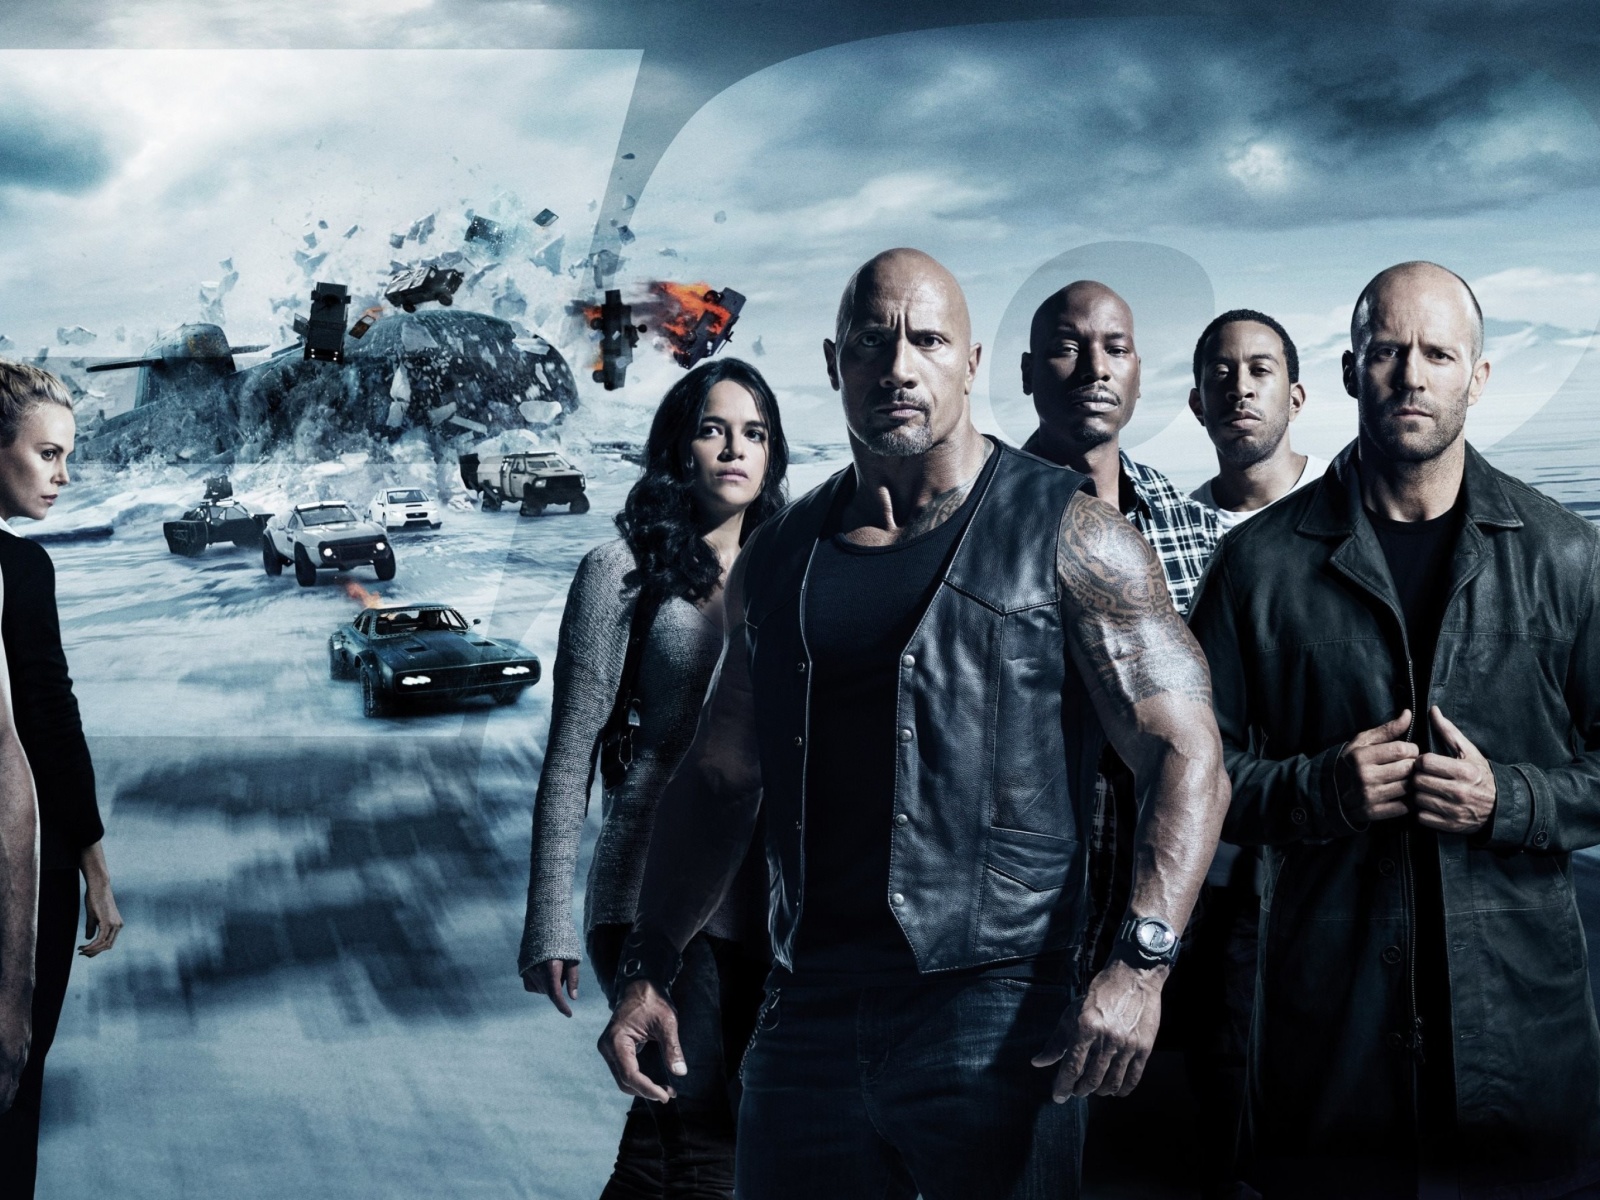 Sfondi The Fate of the Furious with Vin Diesel, Dwayne Johnson, Charlize Theron 1600x1200